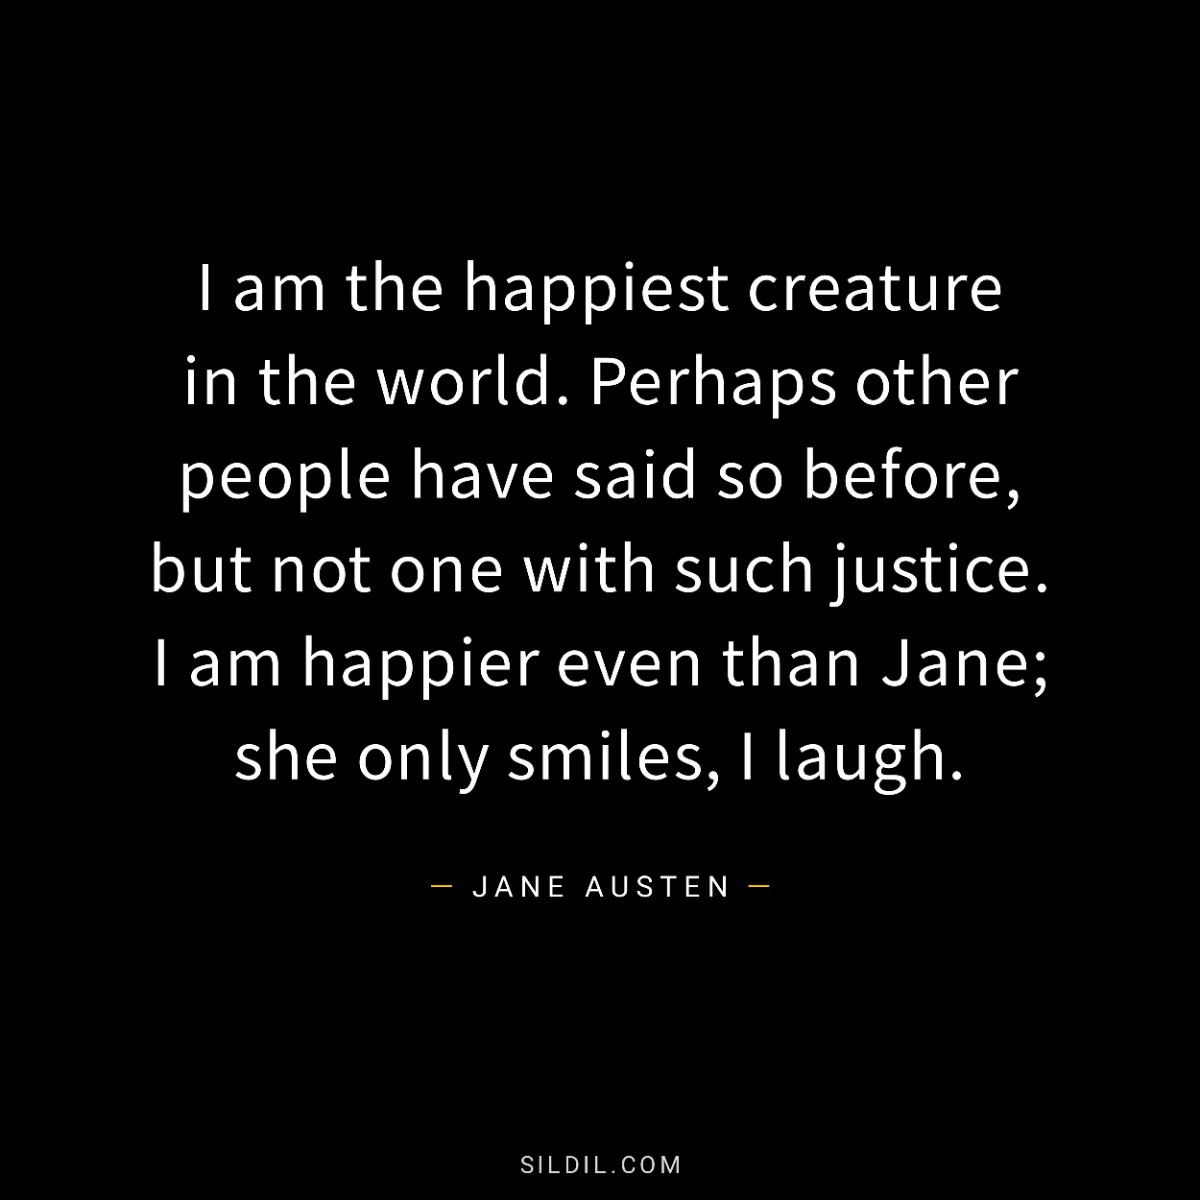 I am the happiest creature in the world. Perhaps other people have said so before, but not one with such justice. I am happier even than Jane; she only smiles, I laugh.